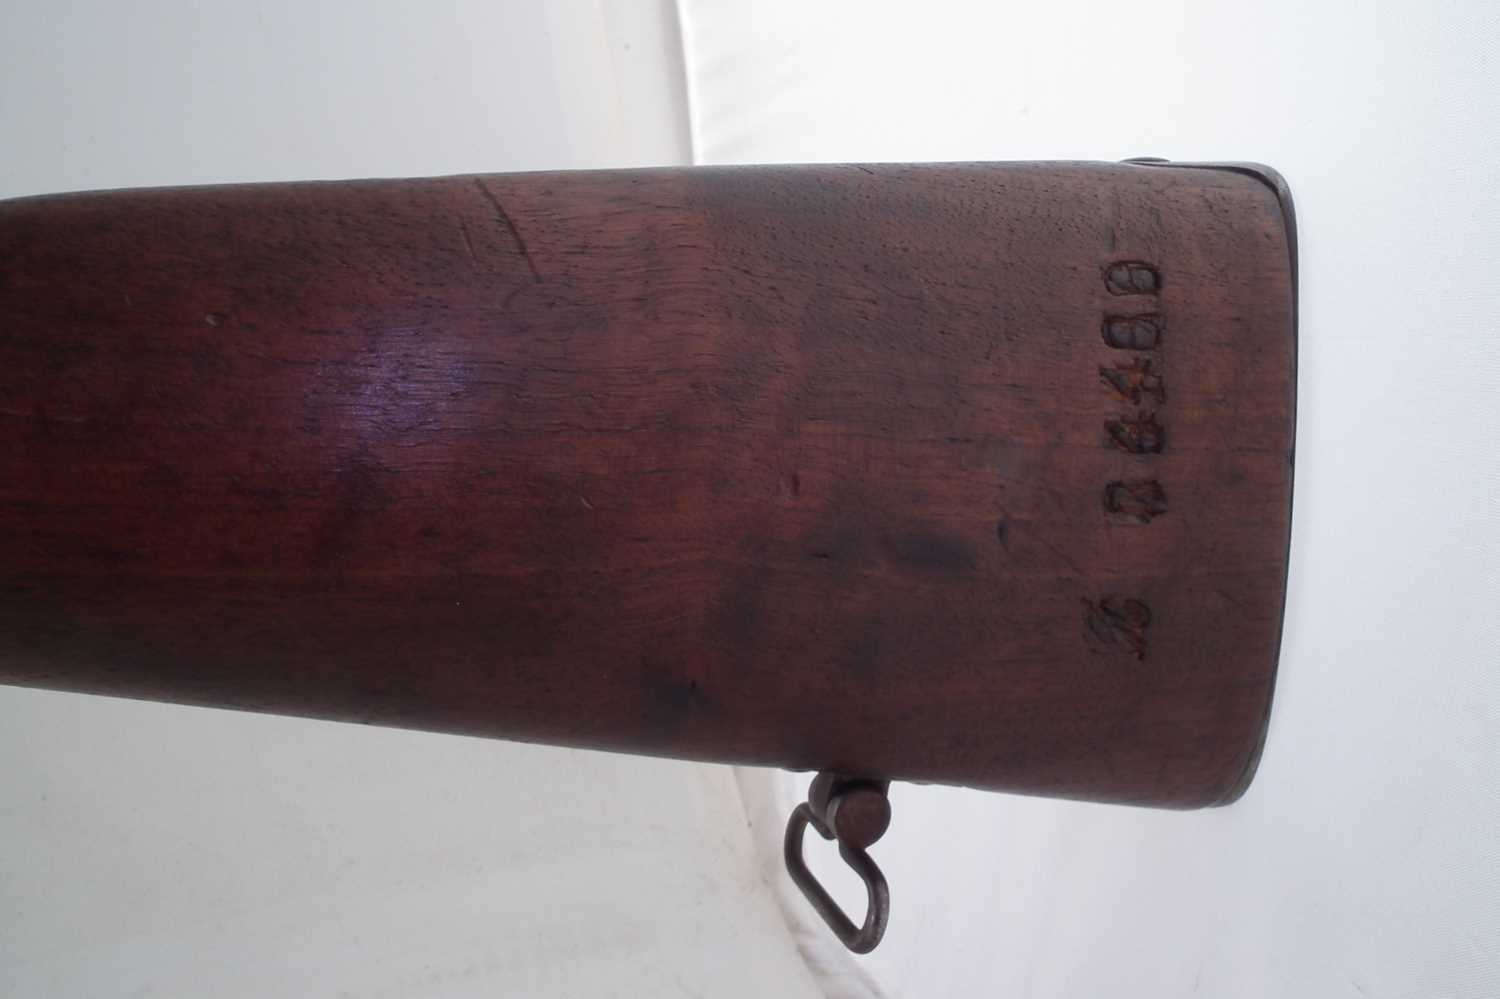 Lebel bolt action rifle serial number 24489 - Image 8 of 13